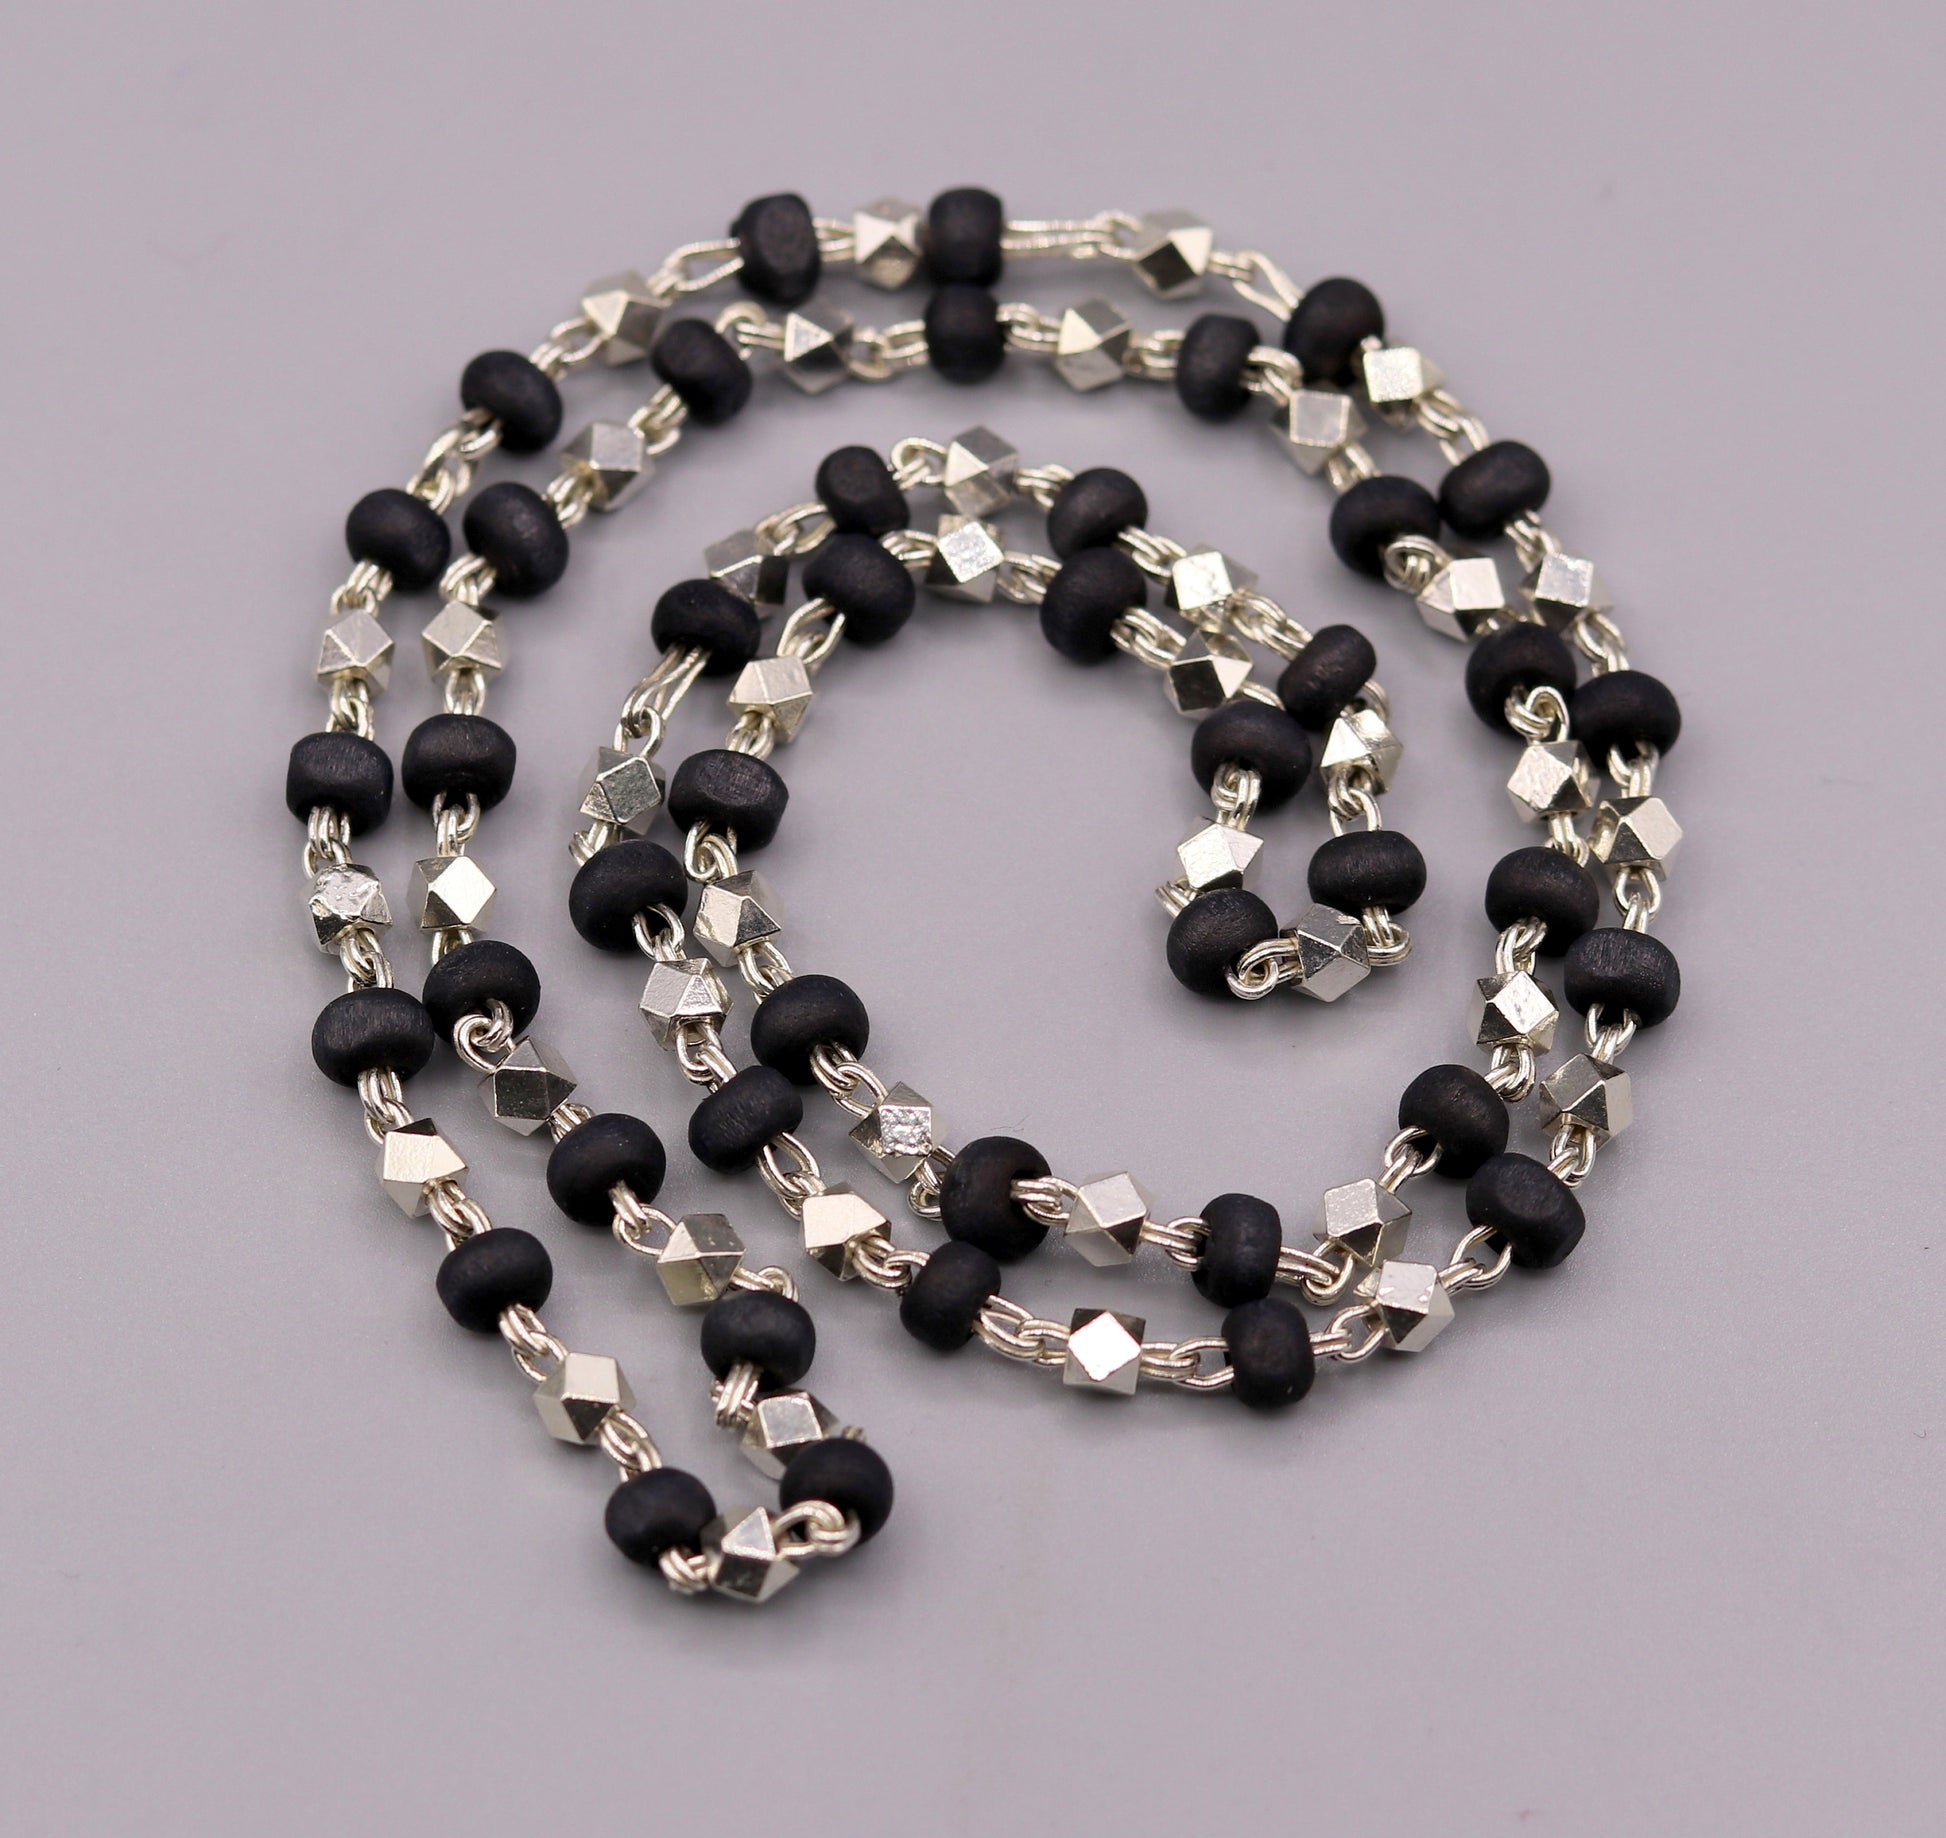 925 Silver handcrafted Black Basil rosary beads with silver beads necklace chain tulsi mala use in Ayurveda feel protected and focused ch20 - TRIBAL ORNAMENTS